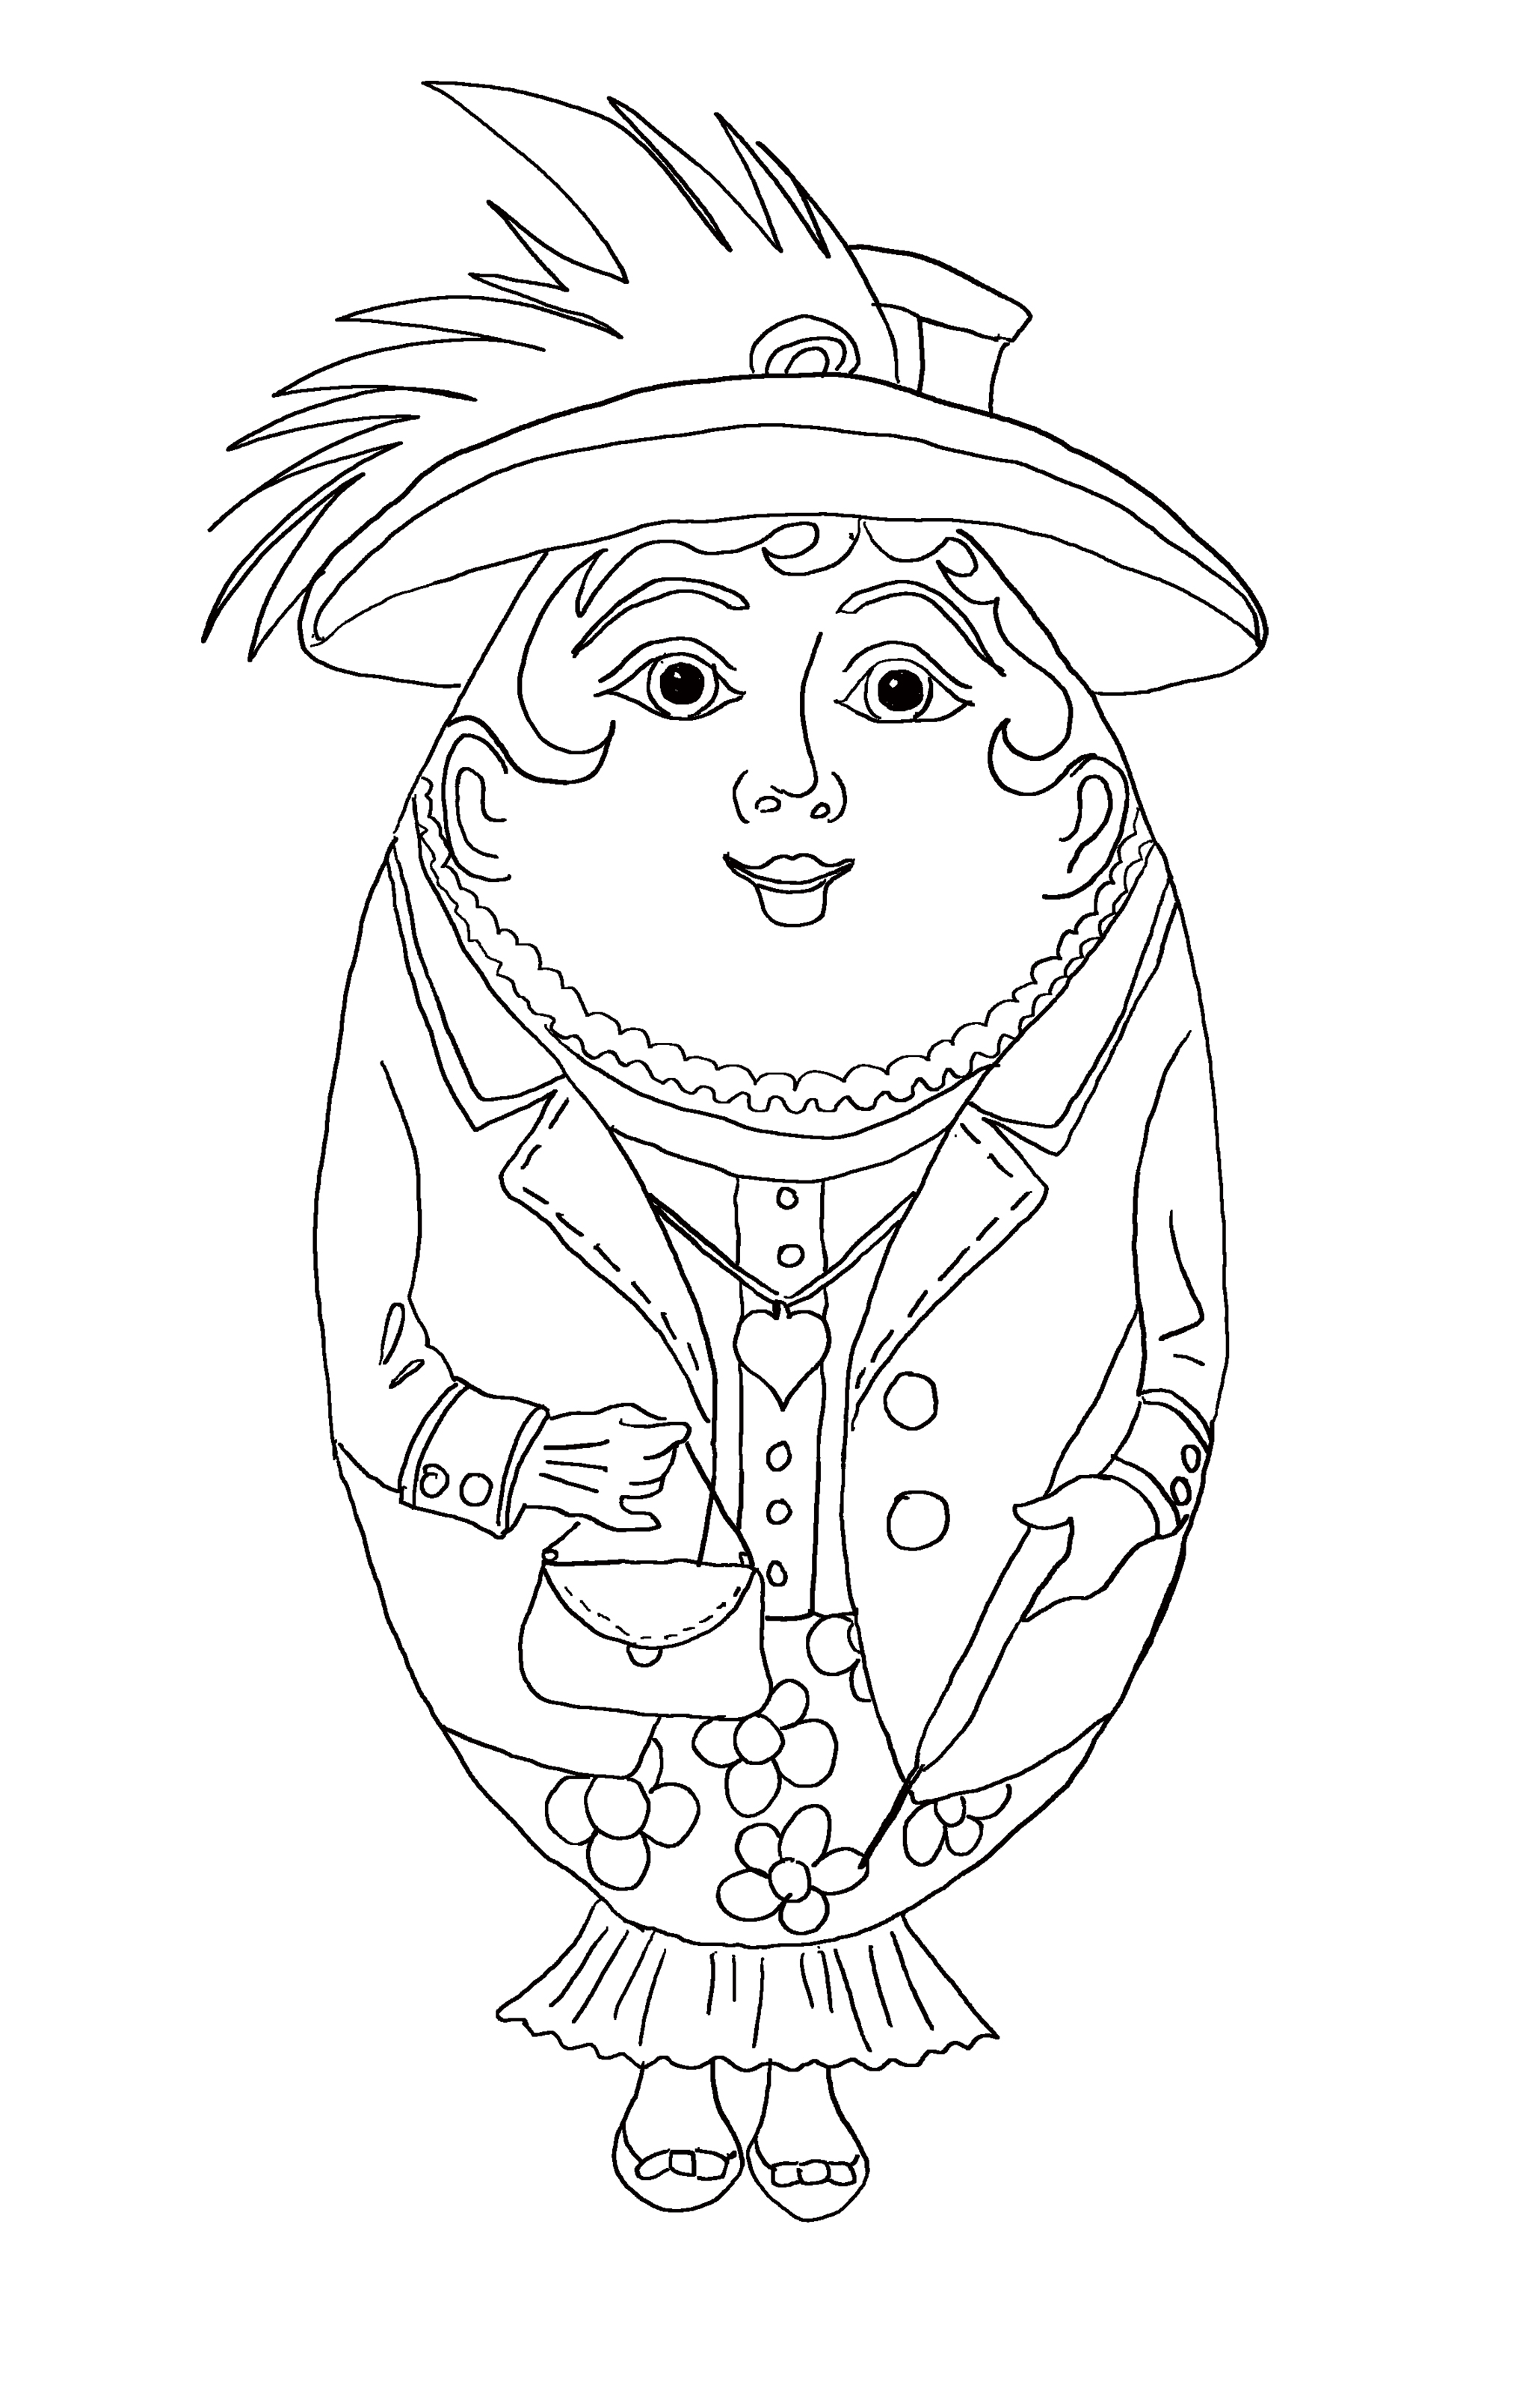 Funny vintage Easter egg woman. Coloring page for kids.